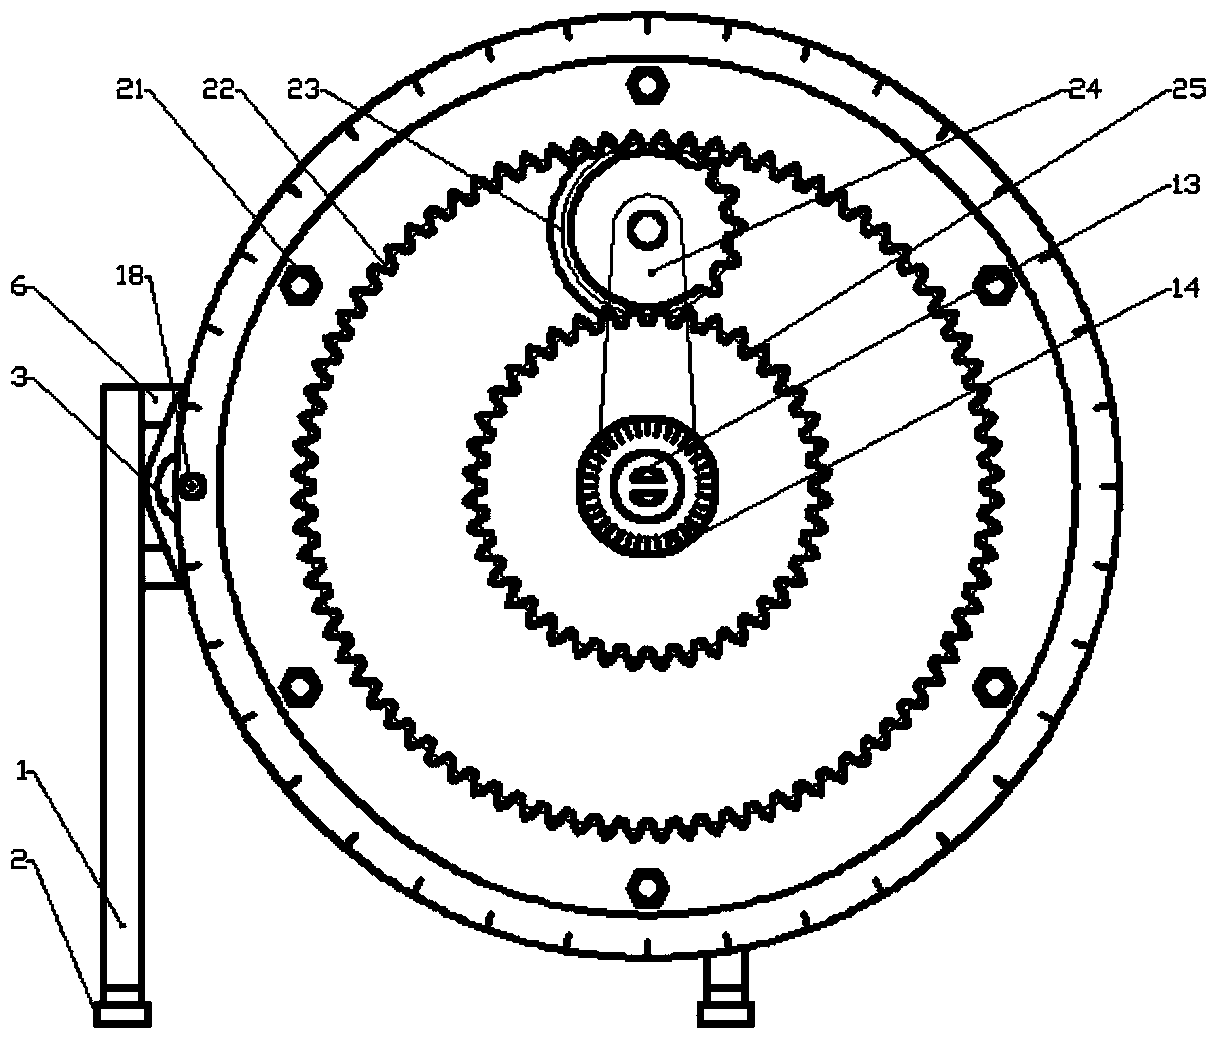 Experimental device and method for mechanisms